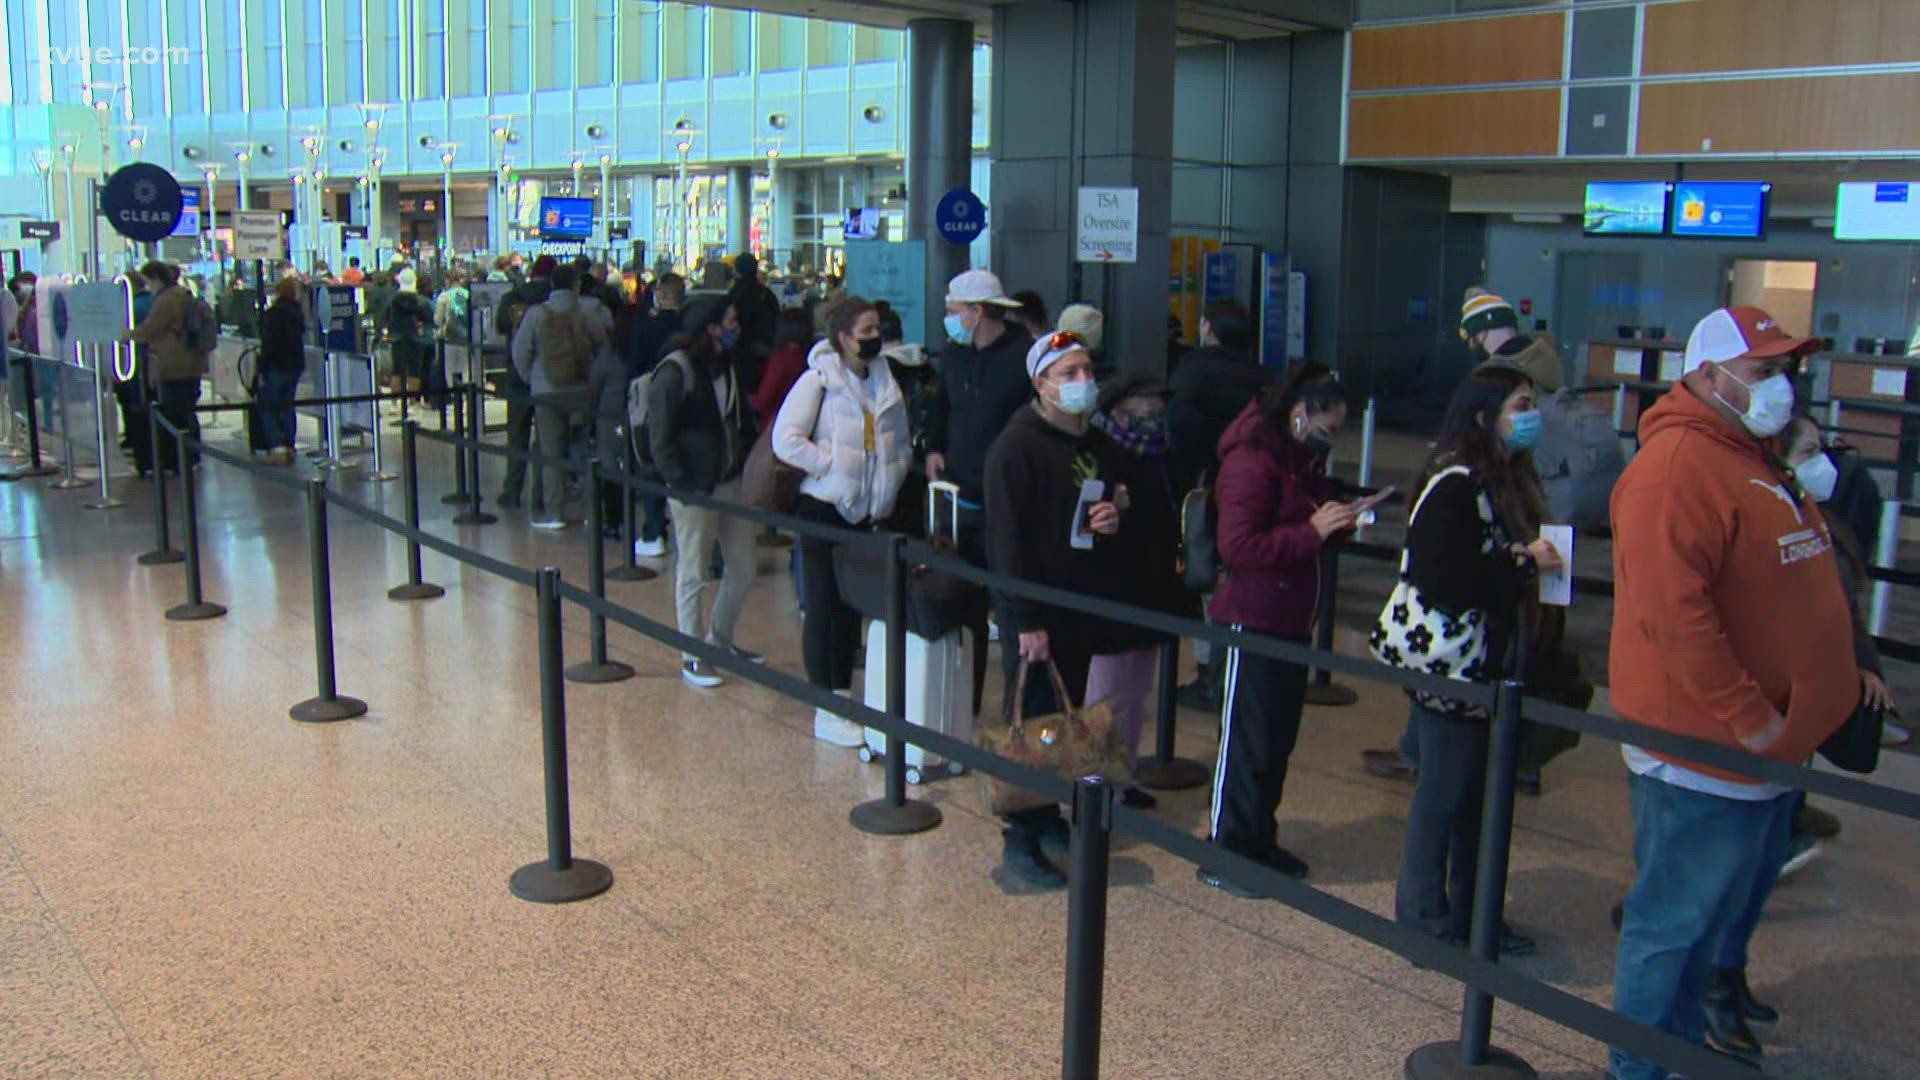 Hundreds of flights were canceled across the nation Thursday and Friday due to the winter storms.